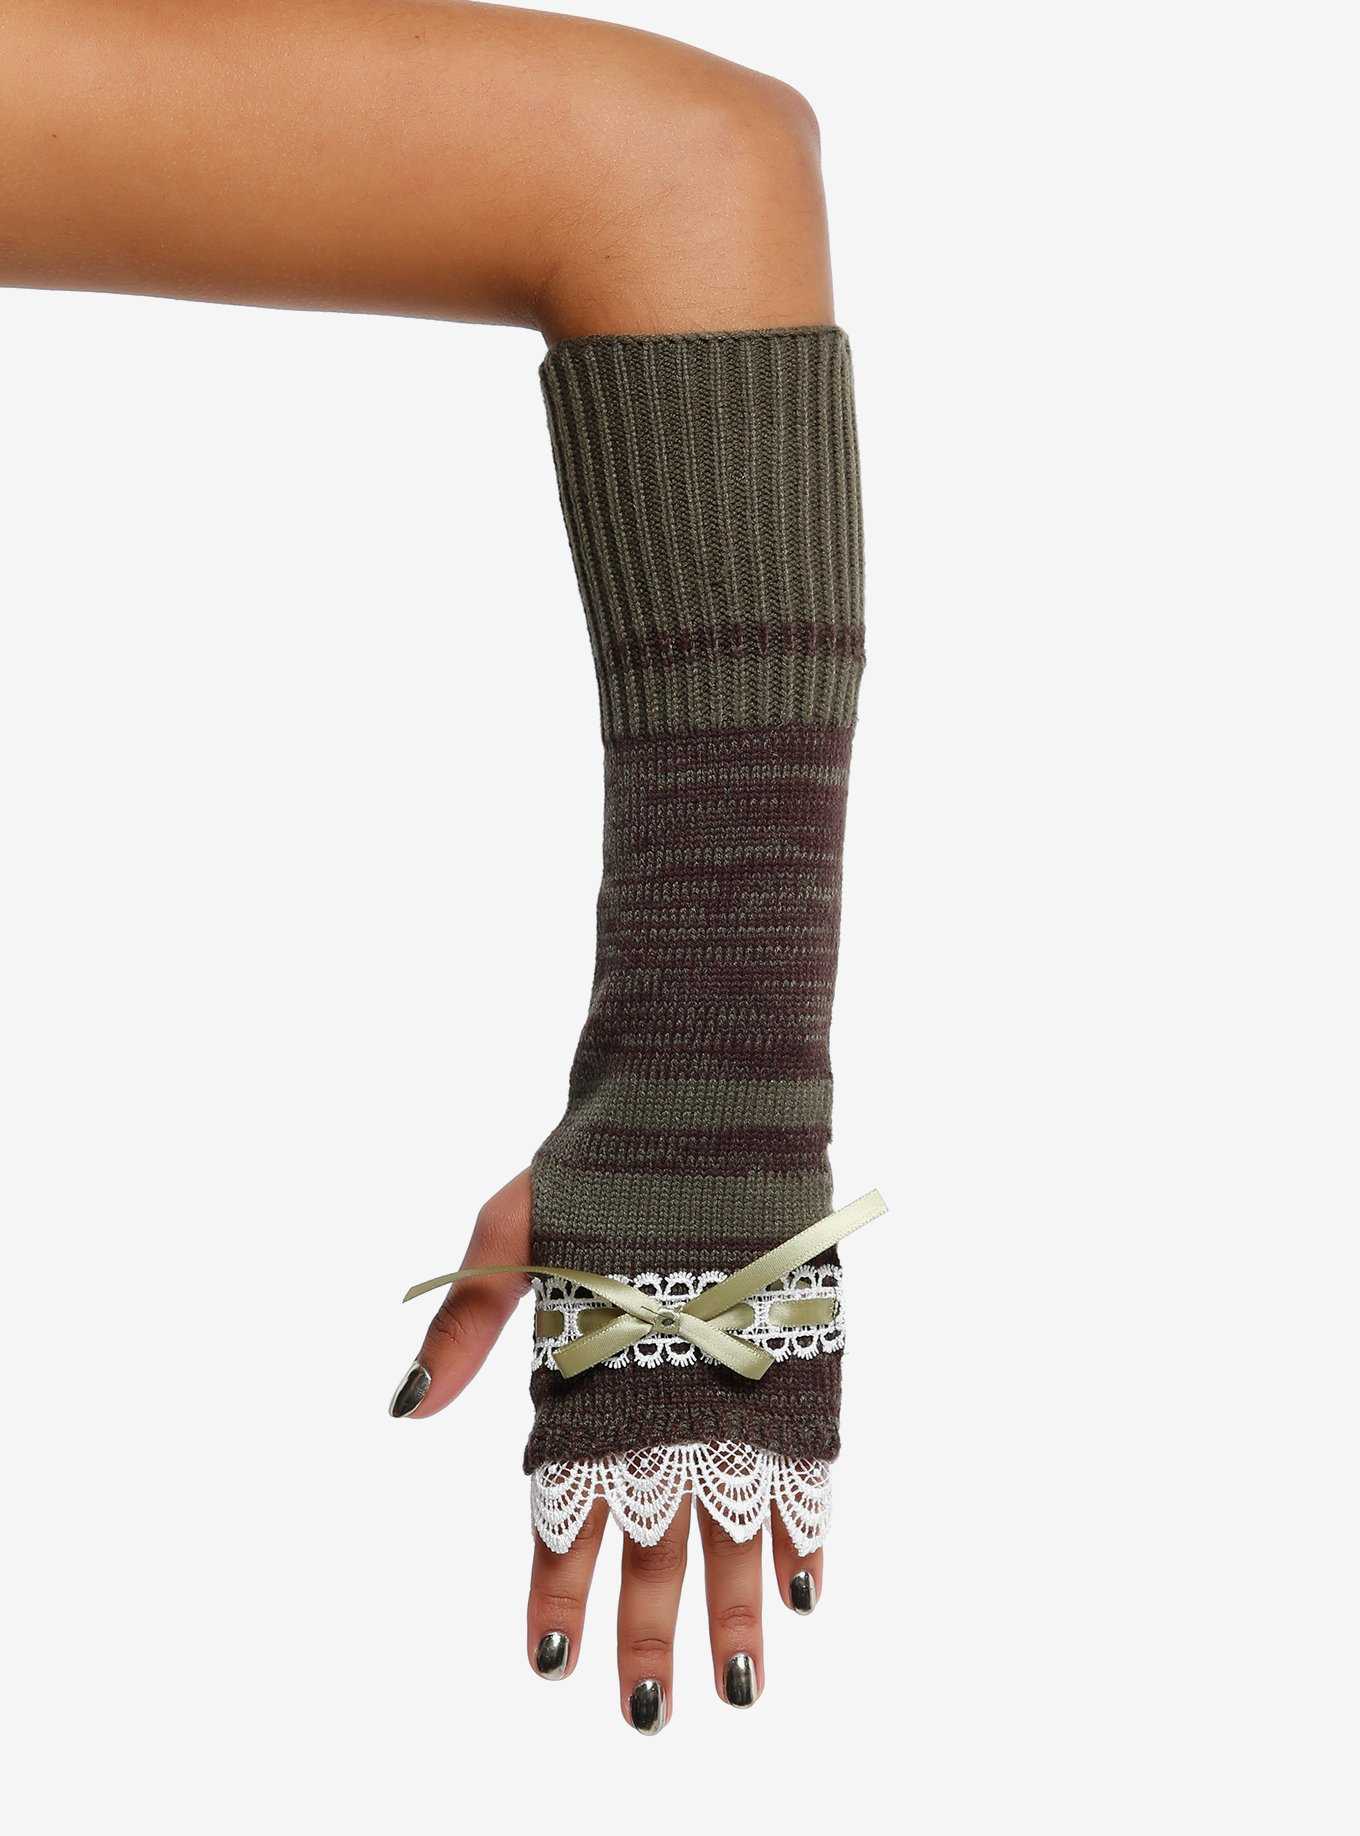 Green Stripe Lace Arm Warmers, , hi-res